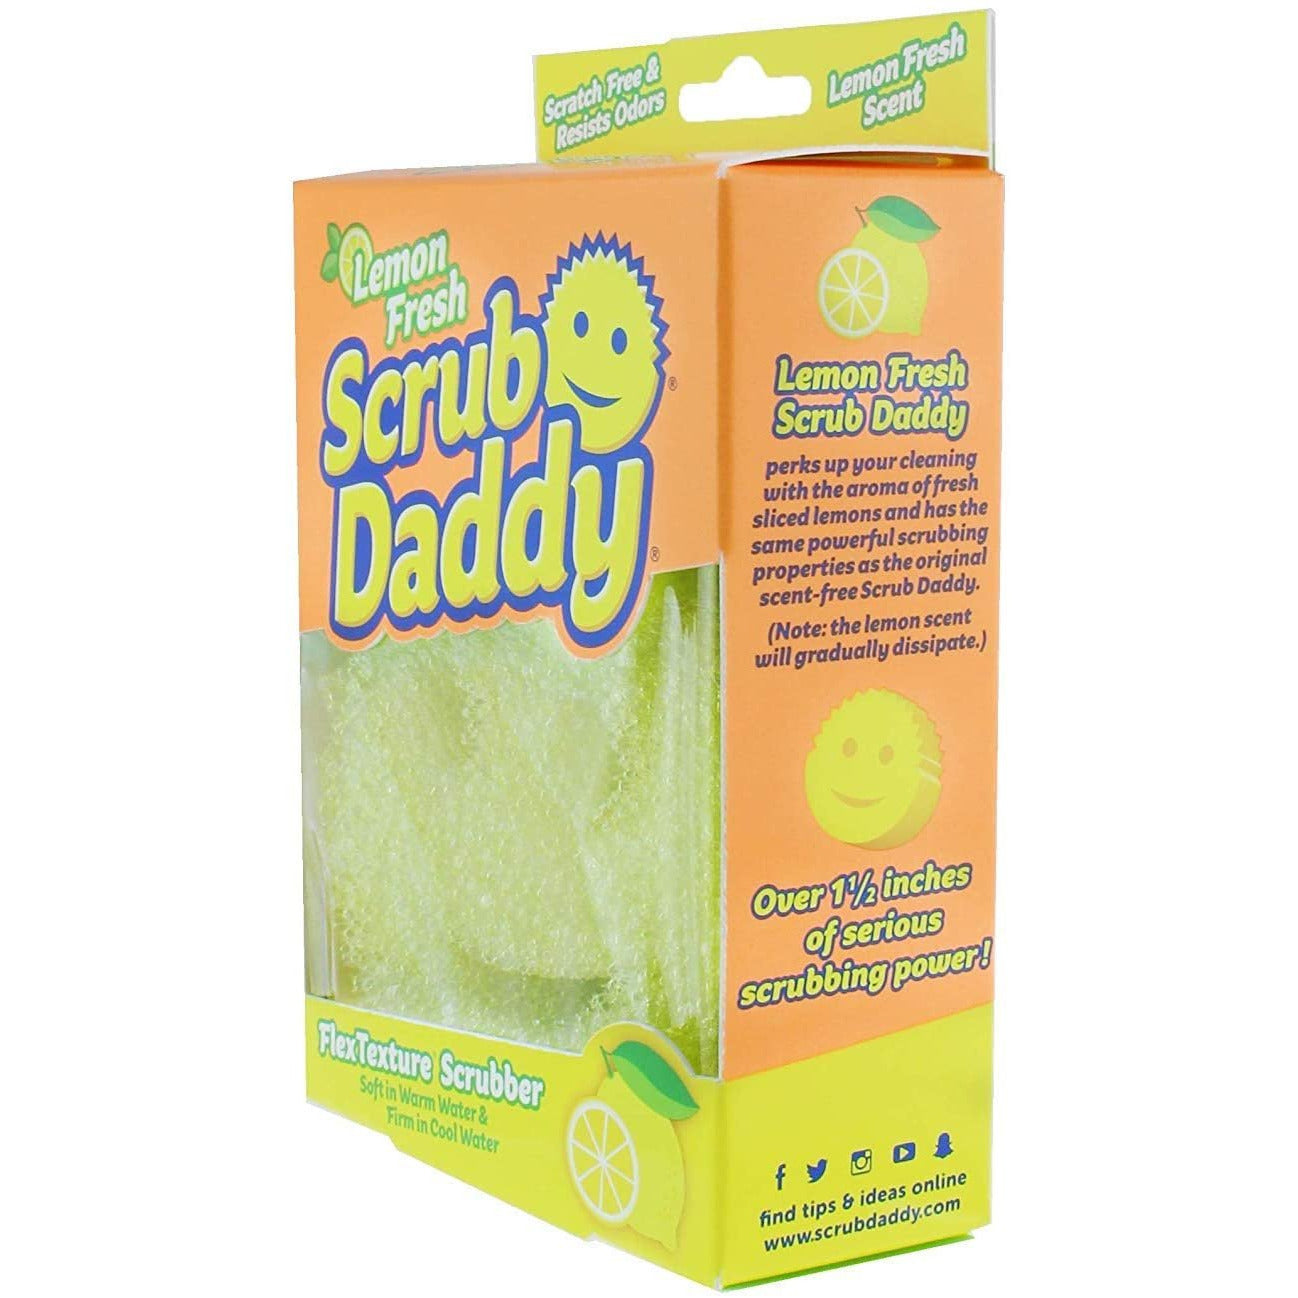 The Original Scrub Daddy - FlexTexture Sponge, Soft in Warm Water, Firm in  Cold, Deep Cleaning, Dishwasher Safe, Multi-use, Scratch Free, Odor